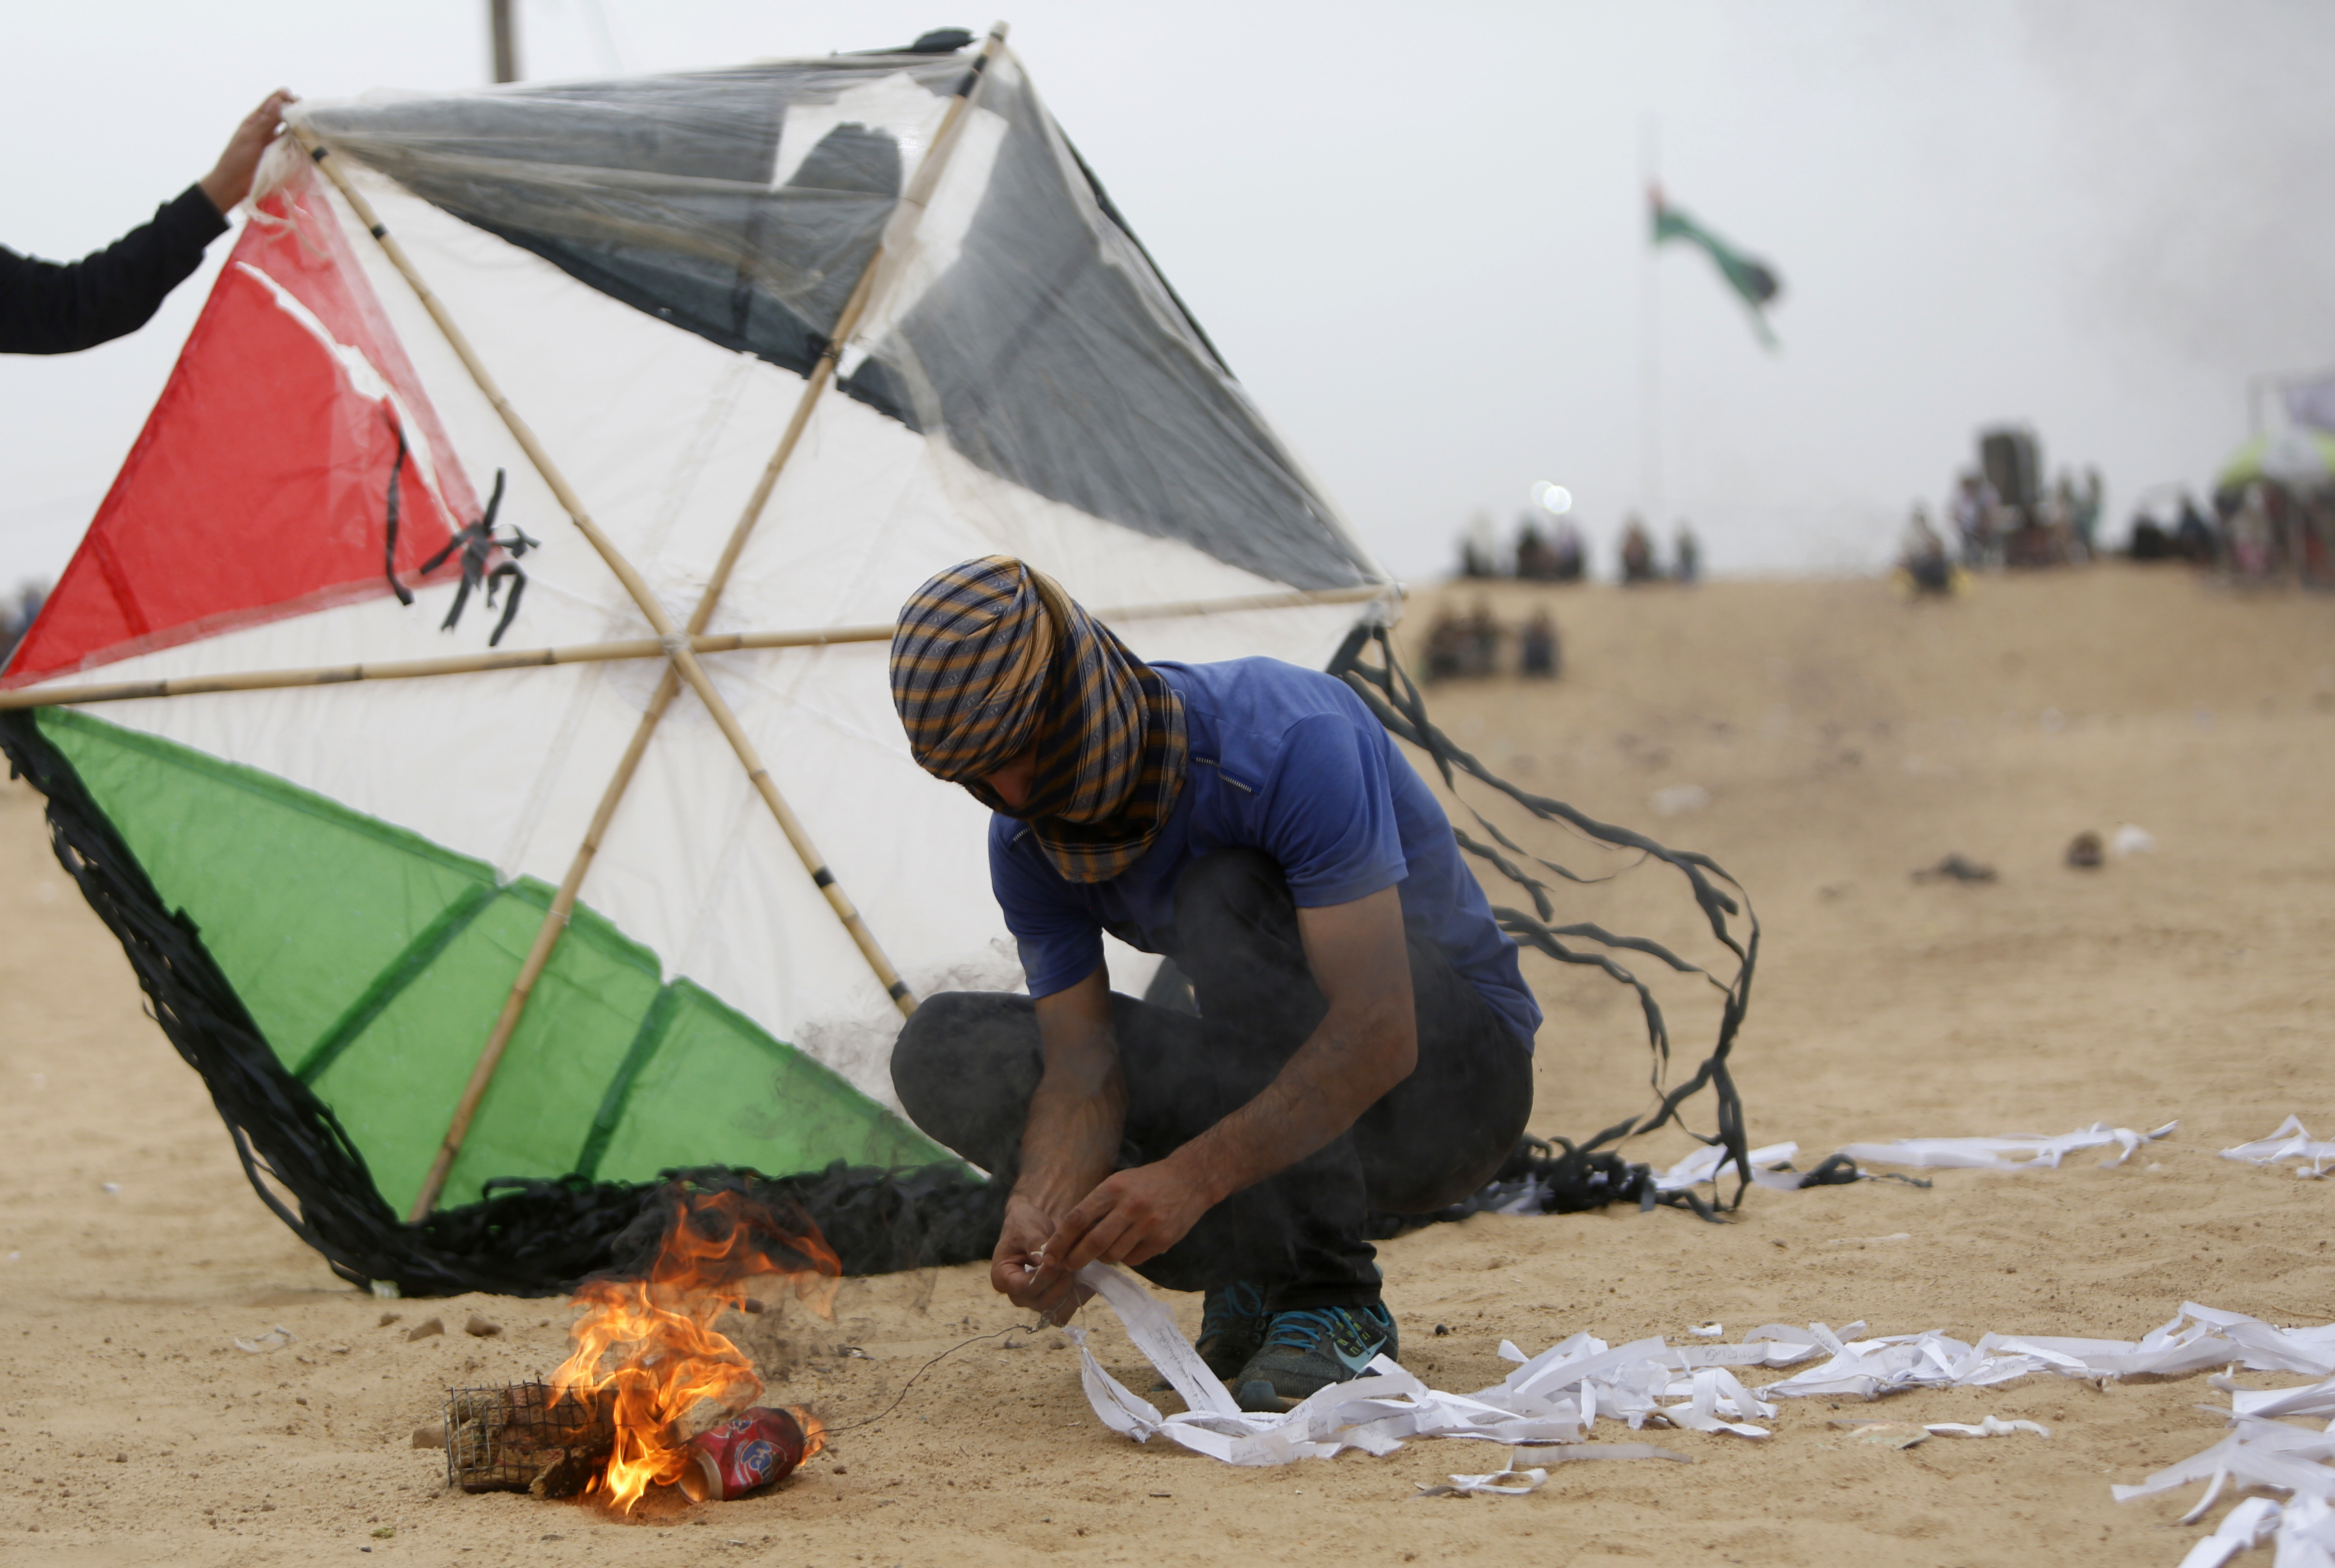 Palestinians prepare an incendiary device attached to a kite before trying to fly it over the border fence with Israel, on the eastern outskirts of Jabalia, on May 4, 2018. (MOHAMMED ABED / AFP)